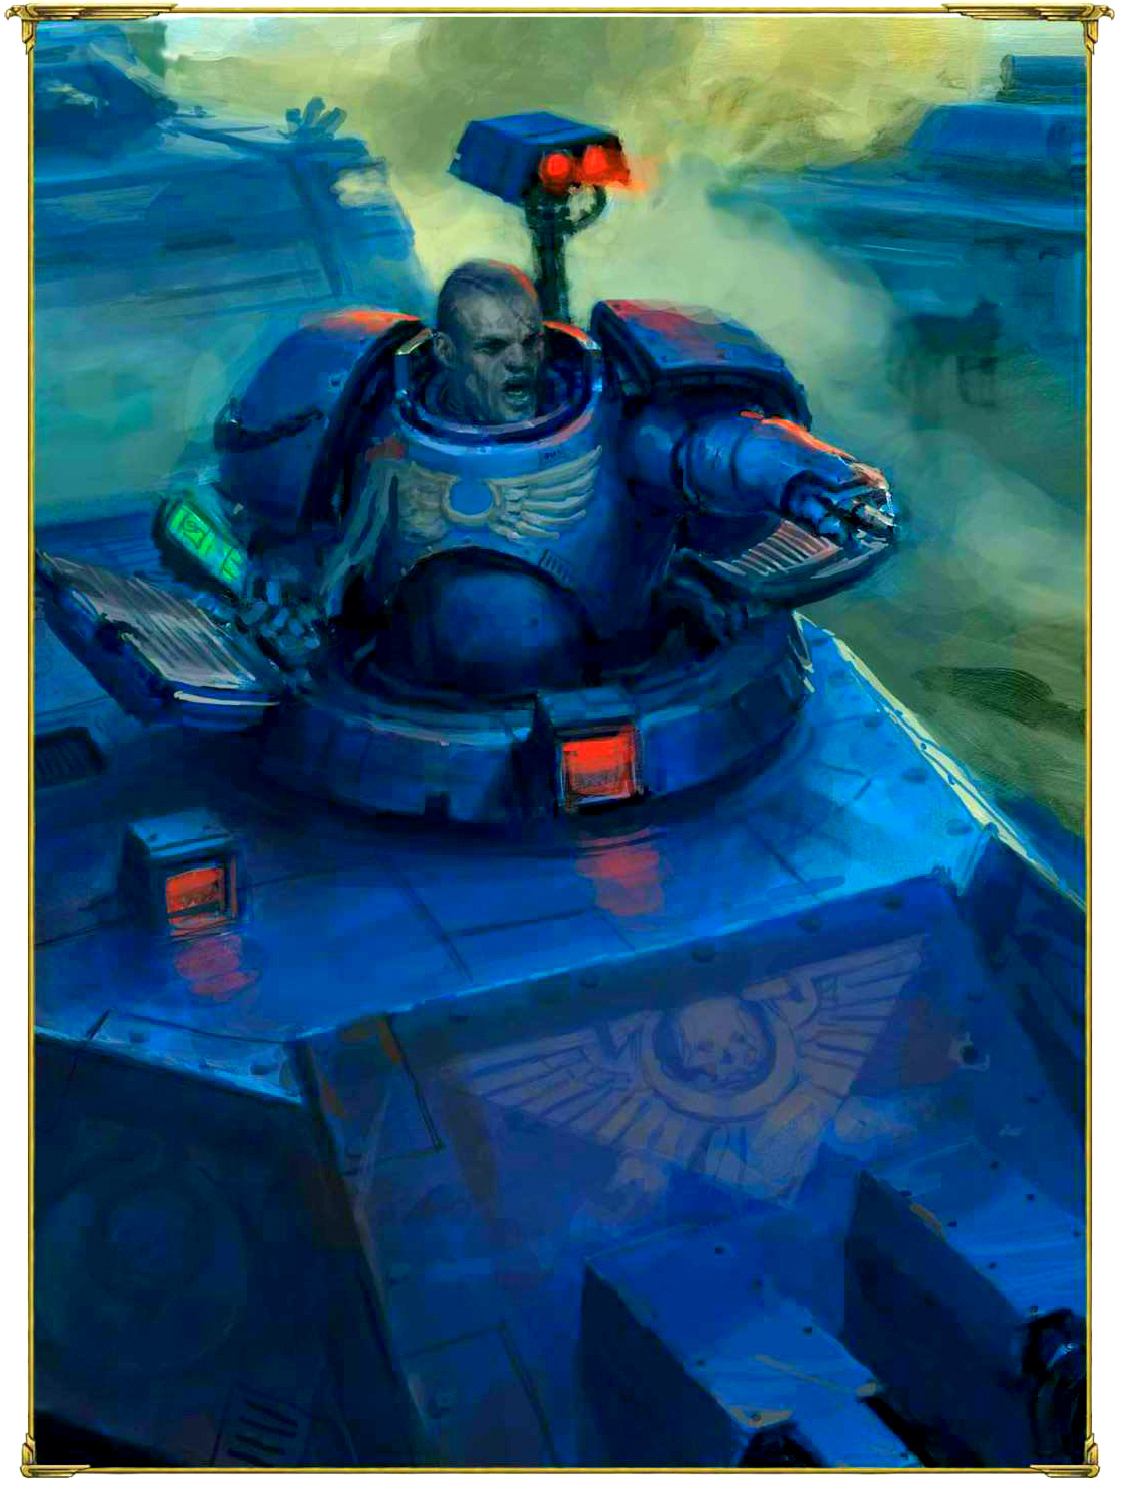 https://static.wikia.nocookie.net/warhammer40k/images/0/02/Brother_Sgt._Chronus.jpg/revision/latest?cb=20131001202218